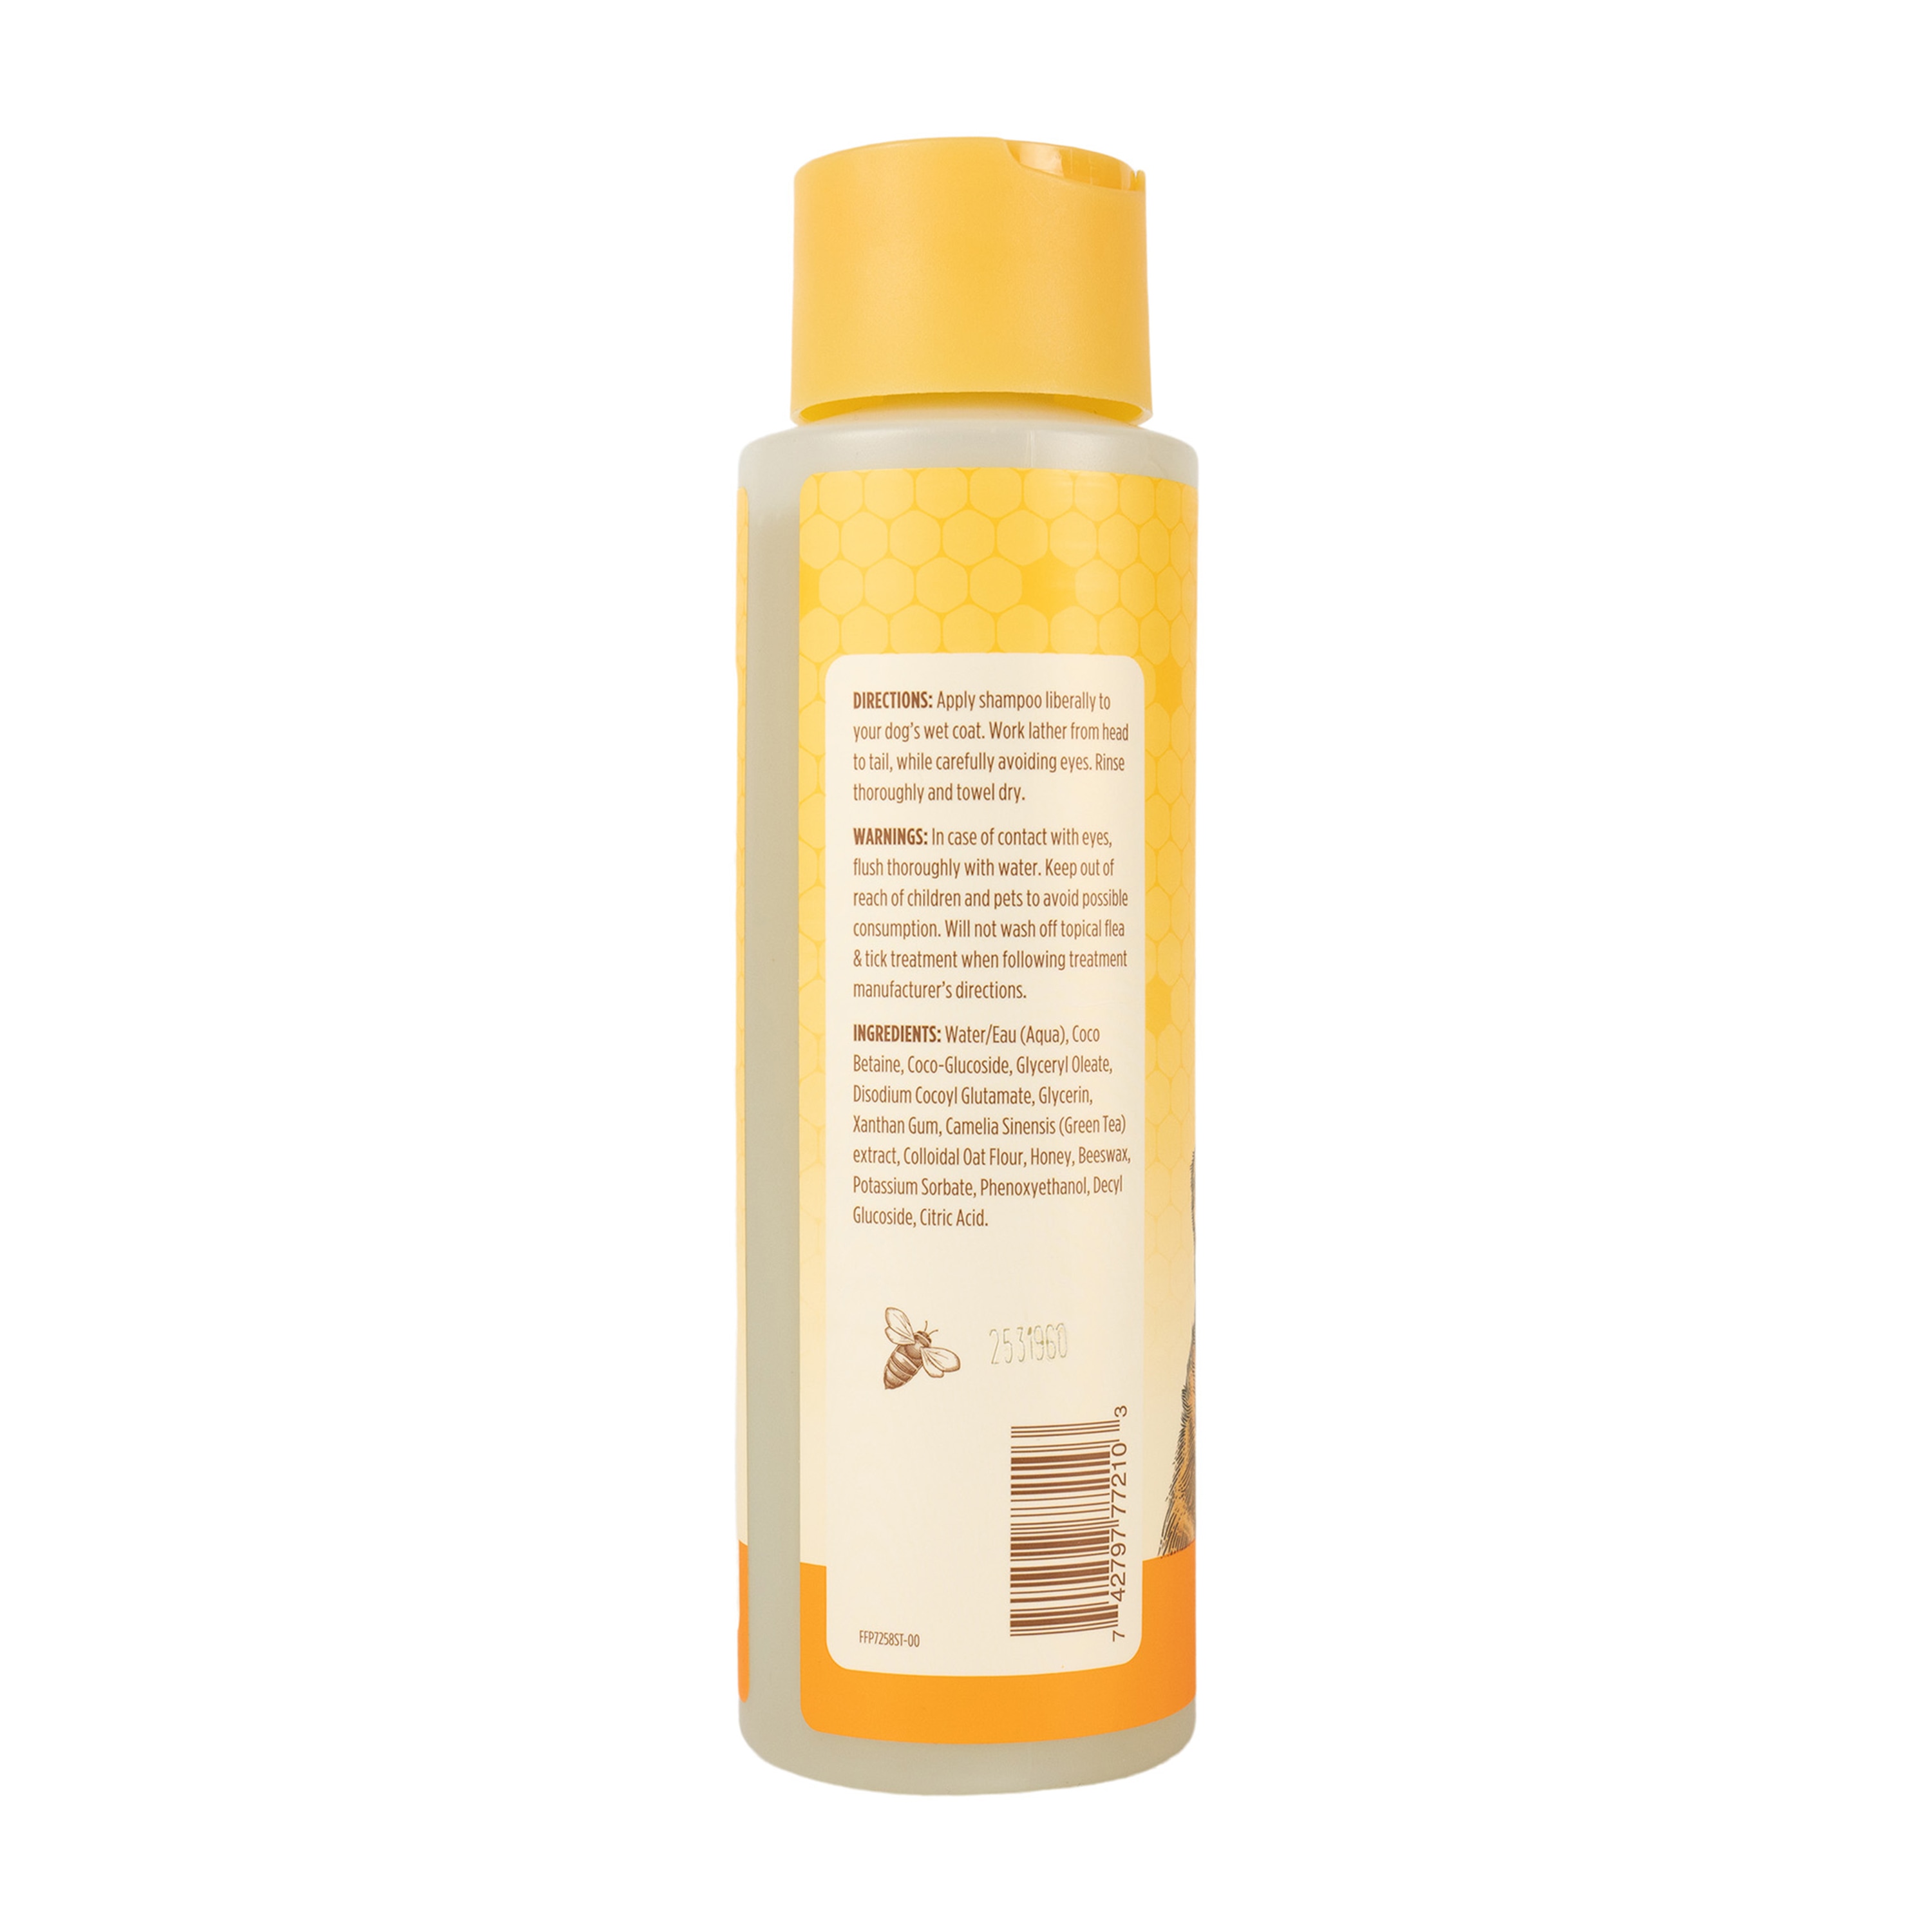 Bees 16-oz Dog Shampoo in the Shampoos, Sprays department at Lowes.com